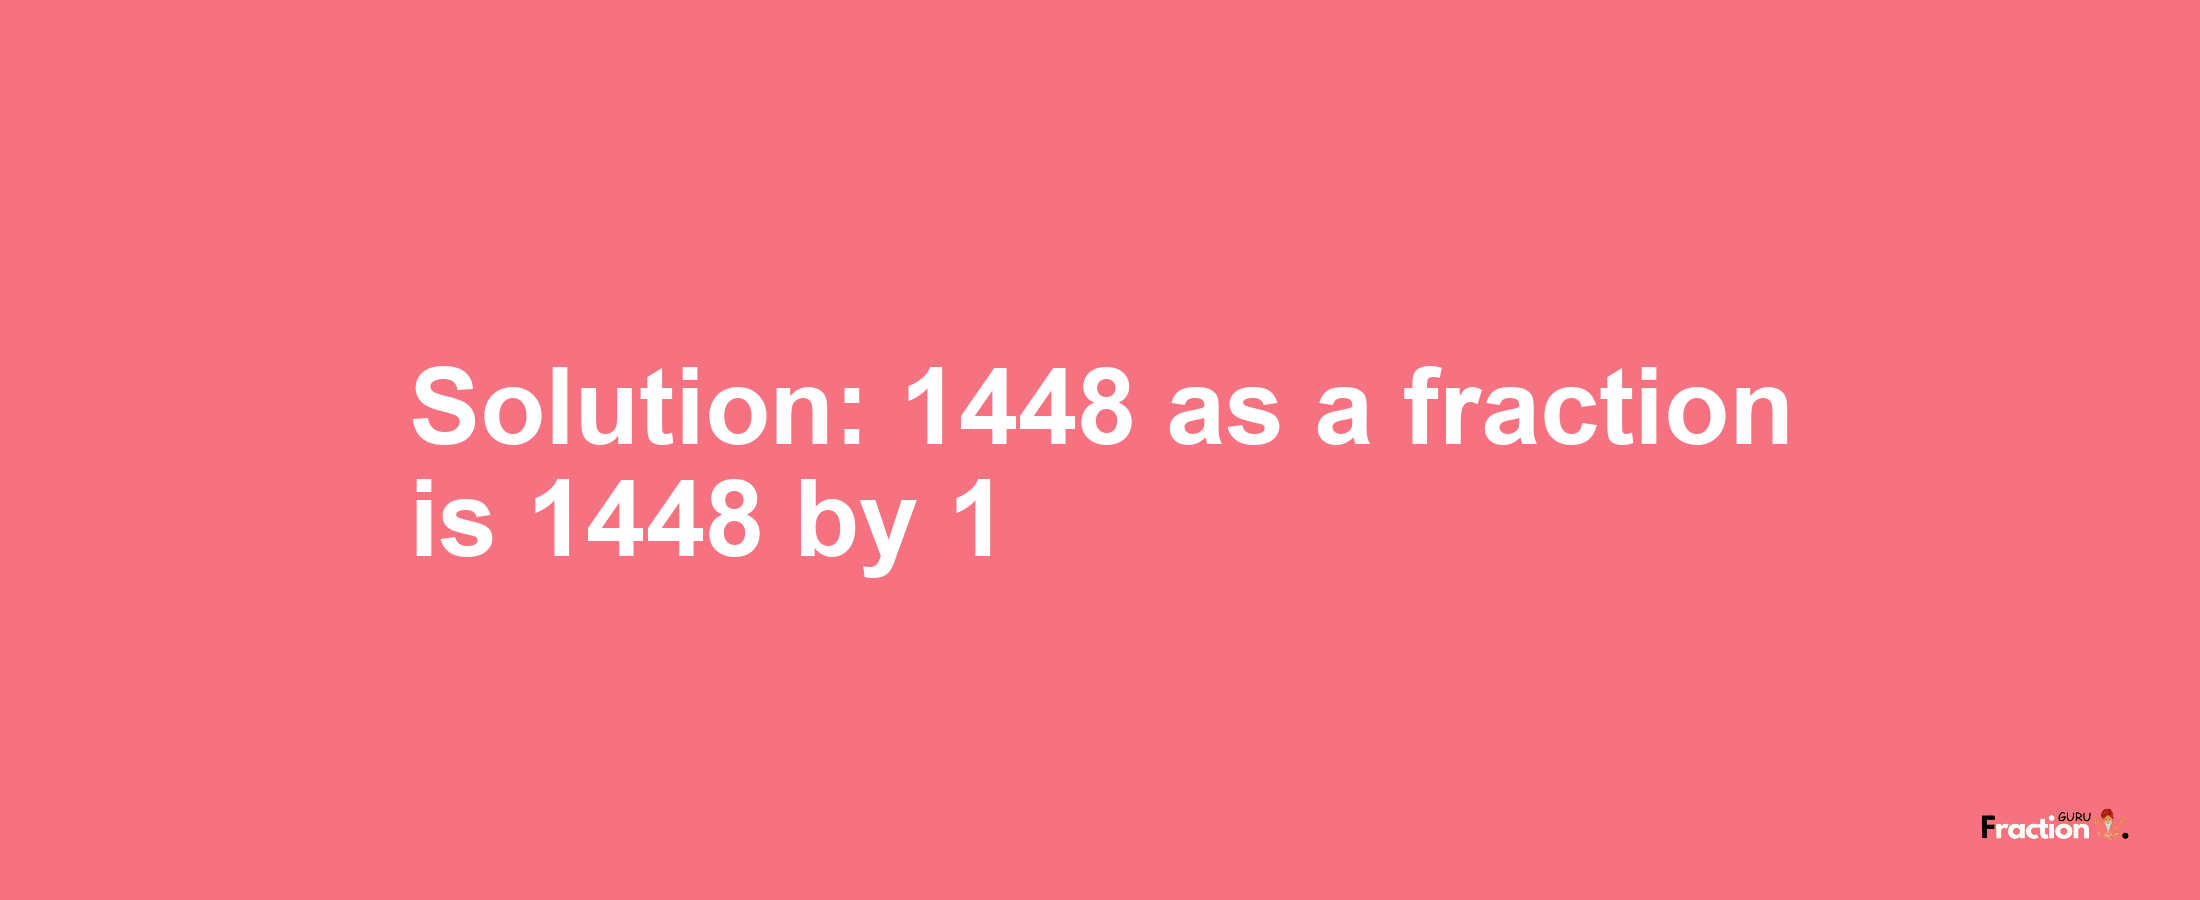 Solution:1448 as a fraction is 1448/1